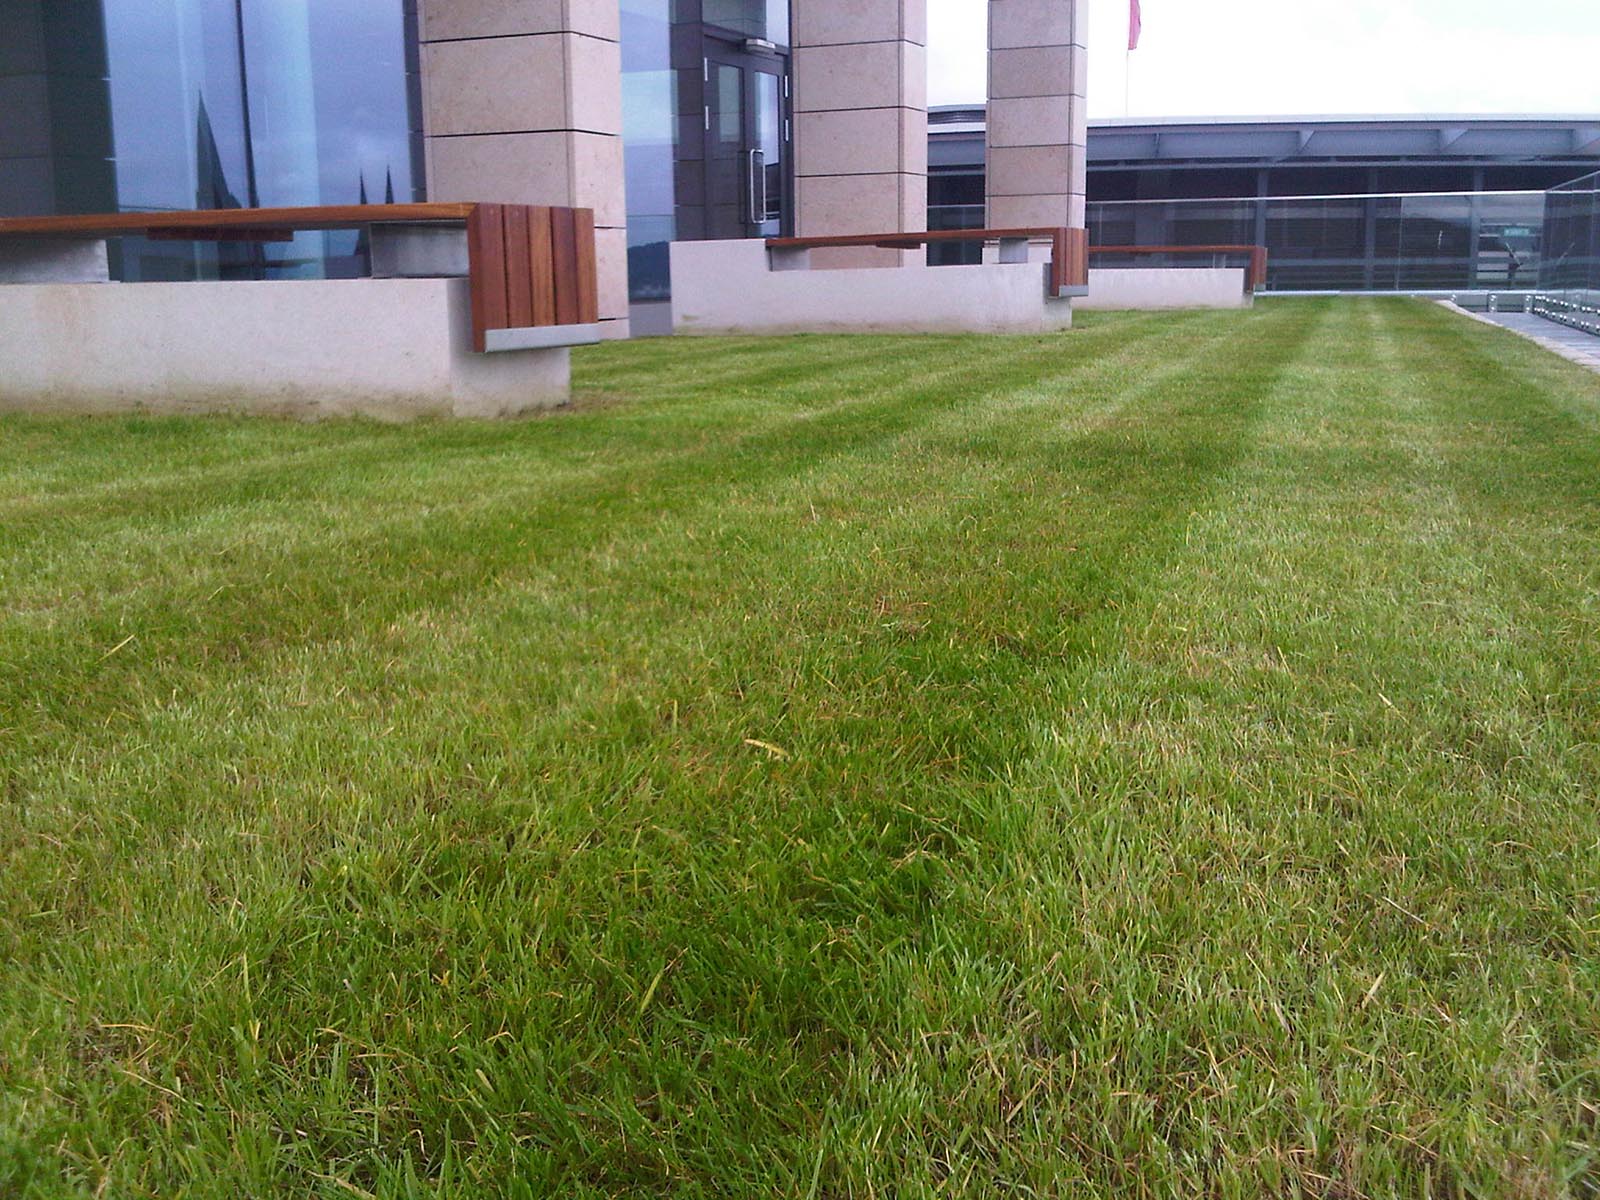 Edinburgh city centre rooftop garden with freshly cut grass – part of our high-quality exterior landscaping service